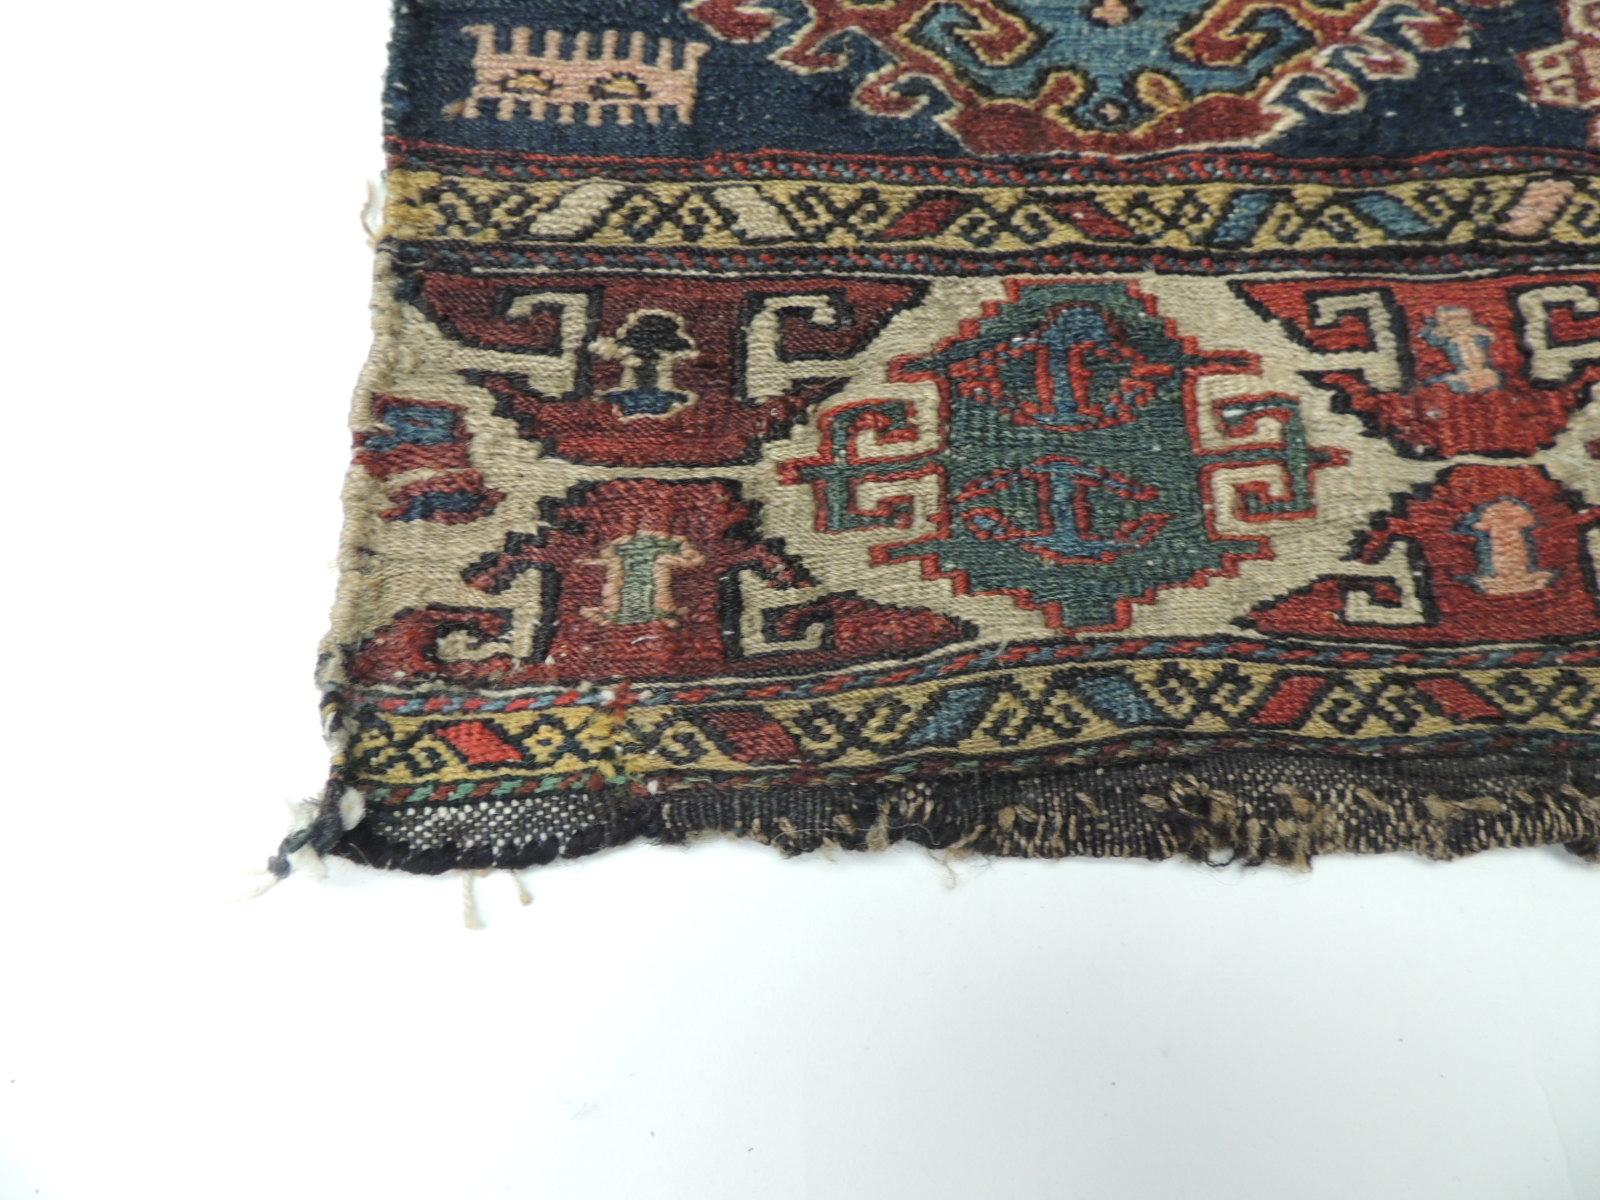 Vintage tribal design Kilim rug - Grain Sack fragment
Vintage Shahsavan fragment of a Kilim rug in the front, and traditional Anatolian kilims all around. This piece is a Soumak which is a term used for weft wrapping weaving technique and it is